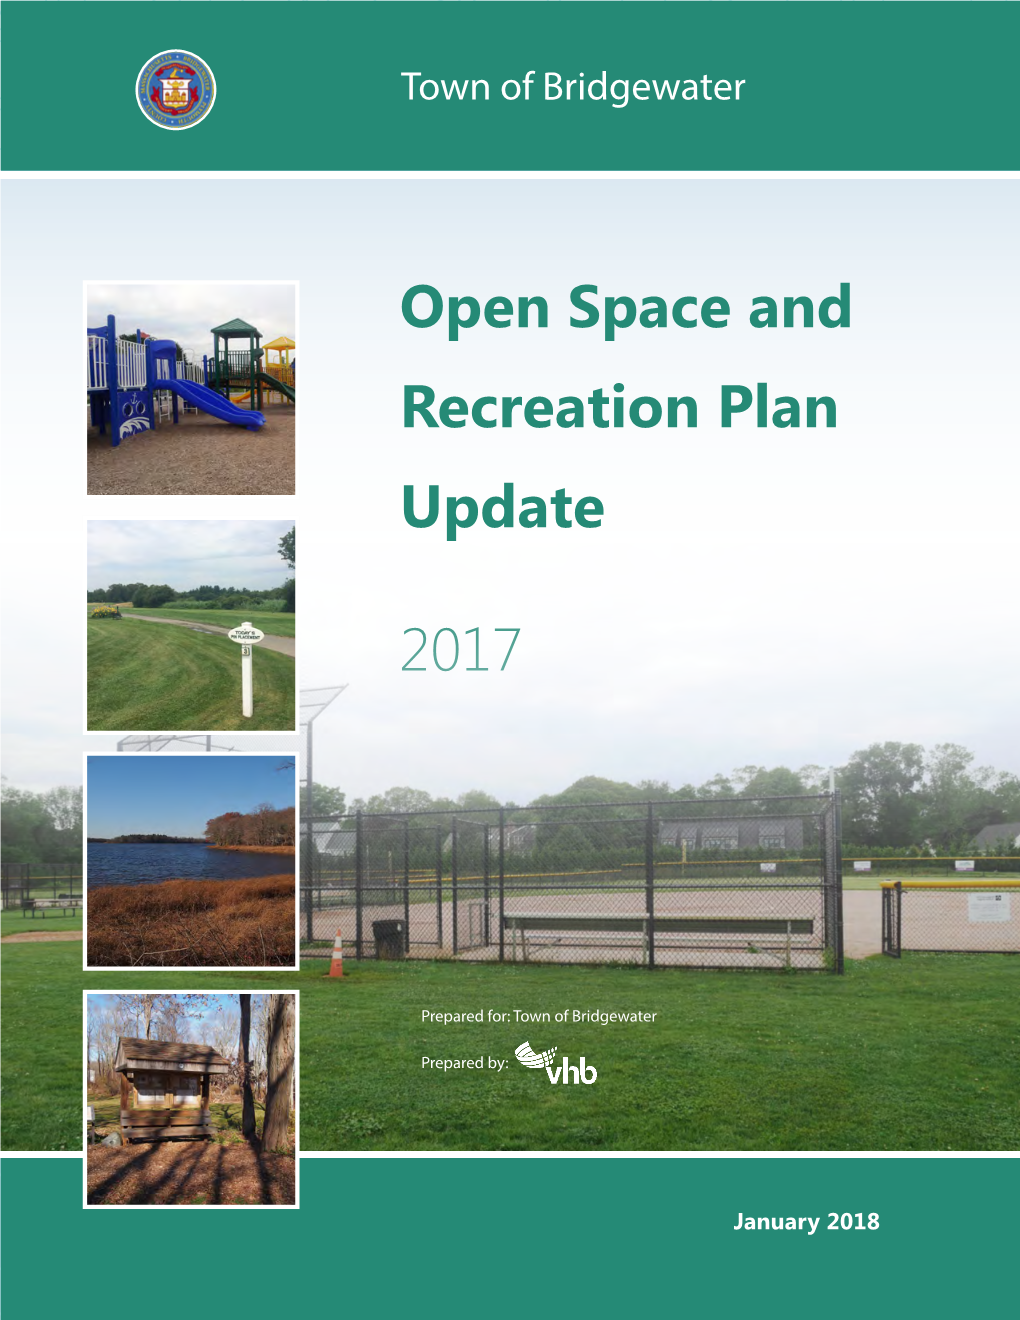 2017 Open Space and Recreation Plan Update